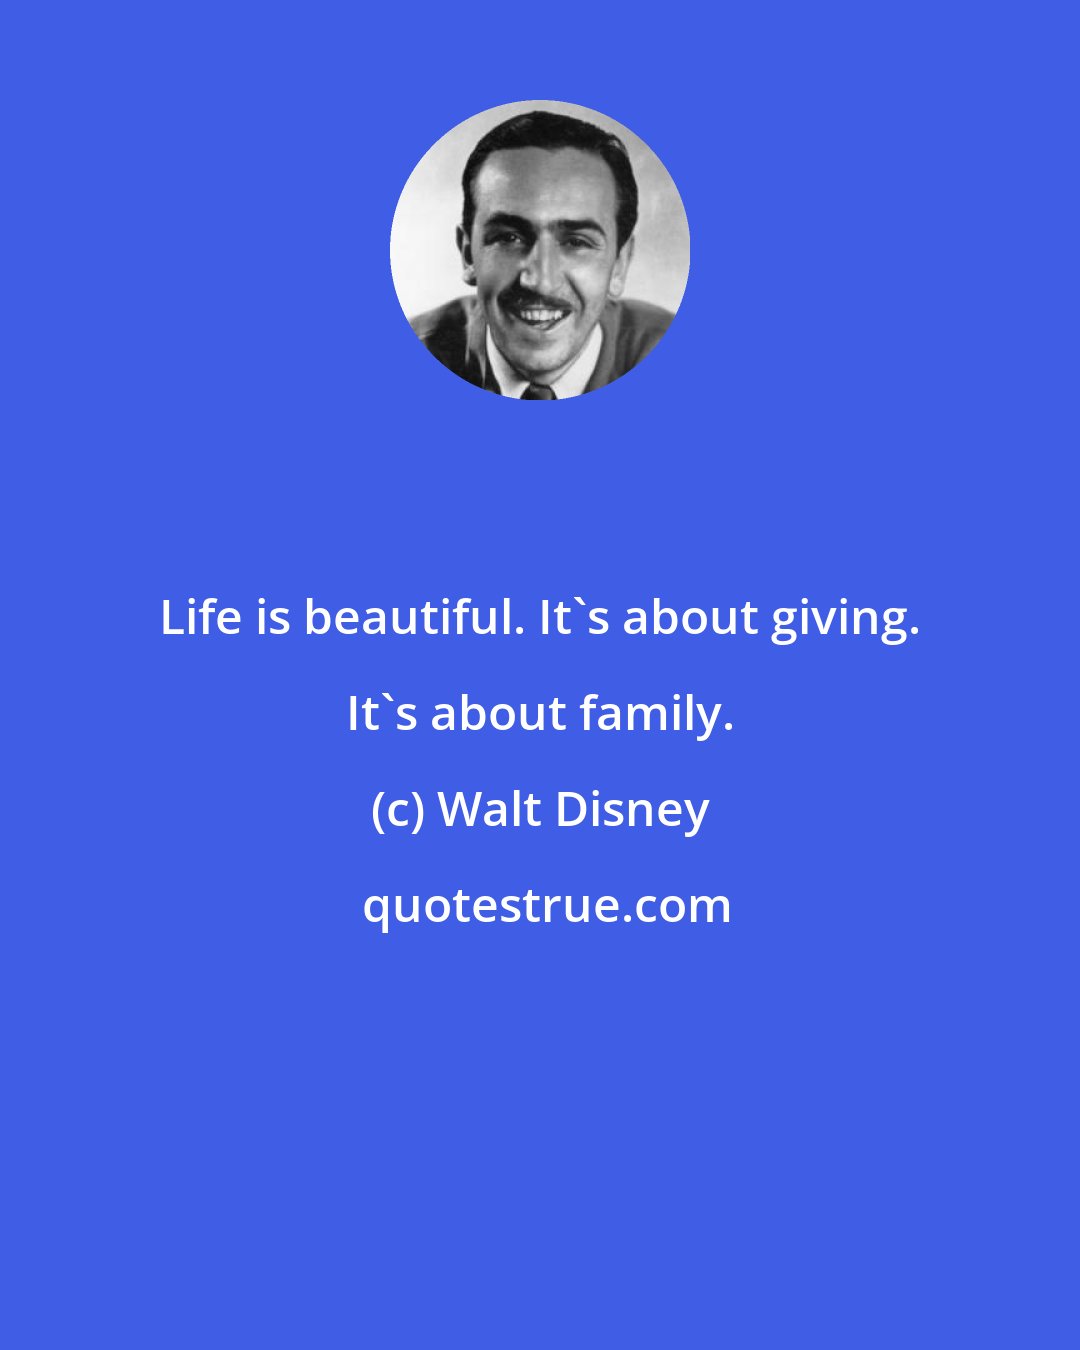 Walt Disney: Life is beautiful. It's about giving. It's about family.